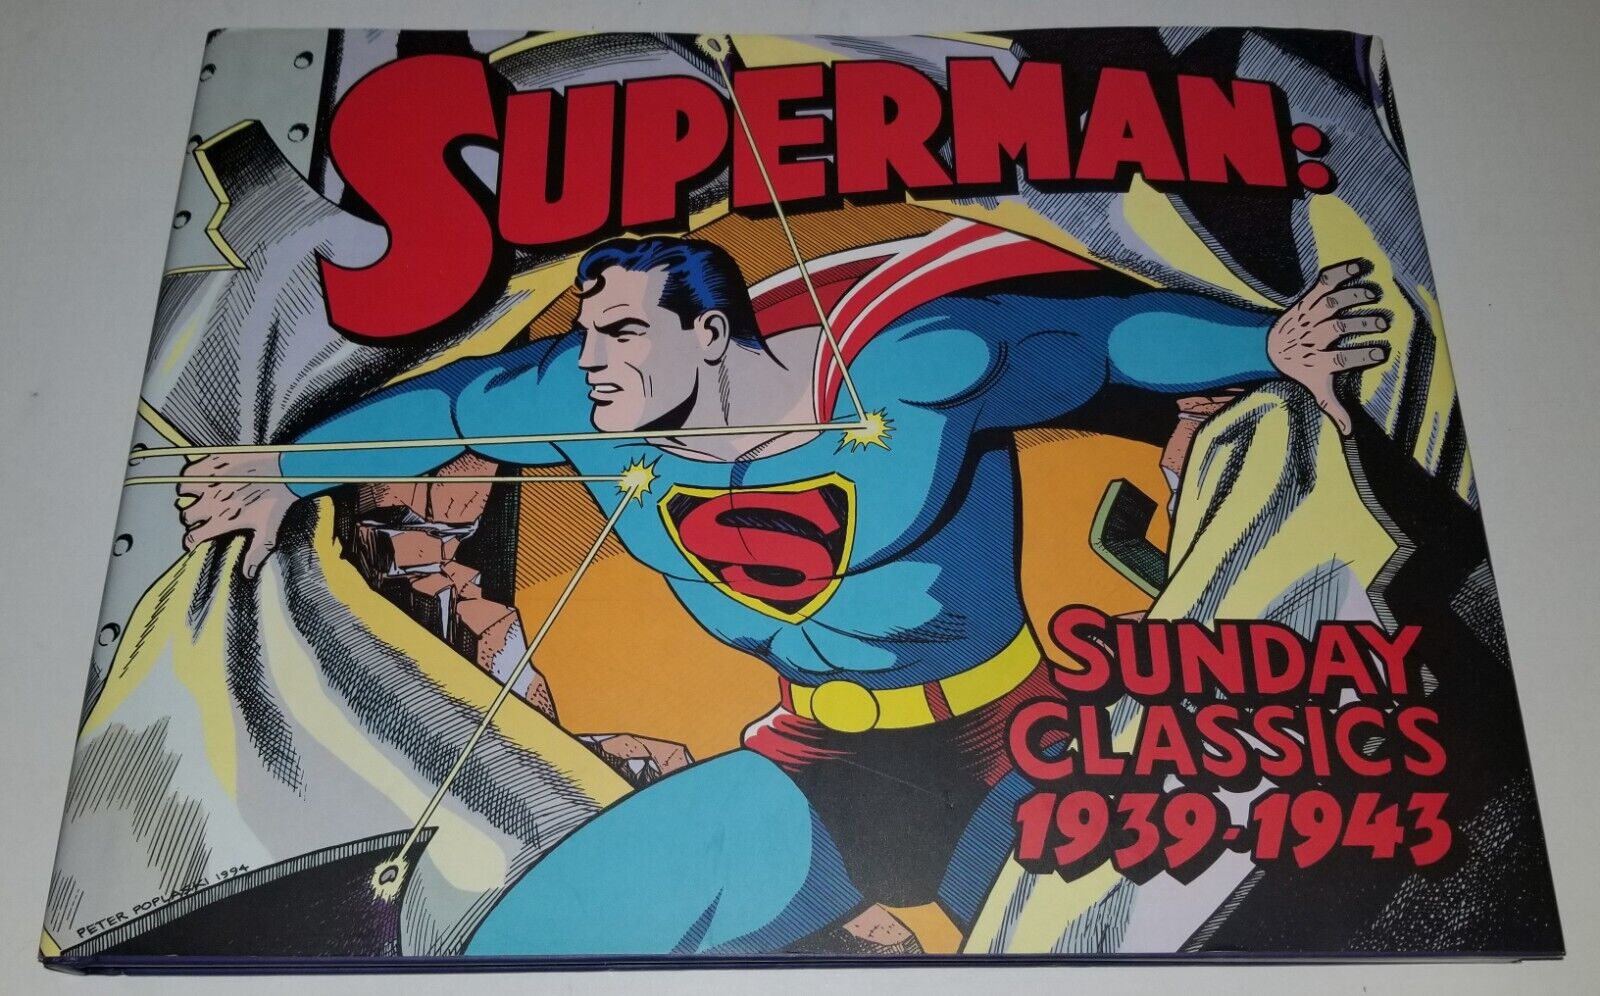 Superman Sunday Classics, 1939-1943, strips 1 to 183, hardcover with dust jacket